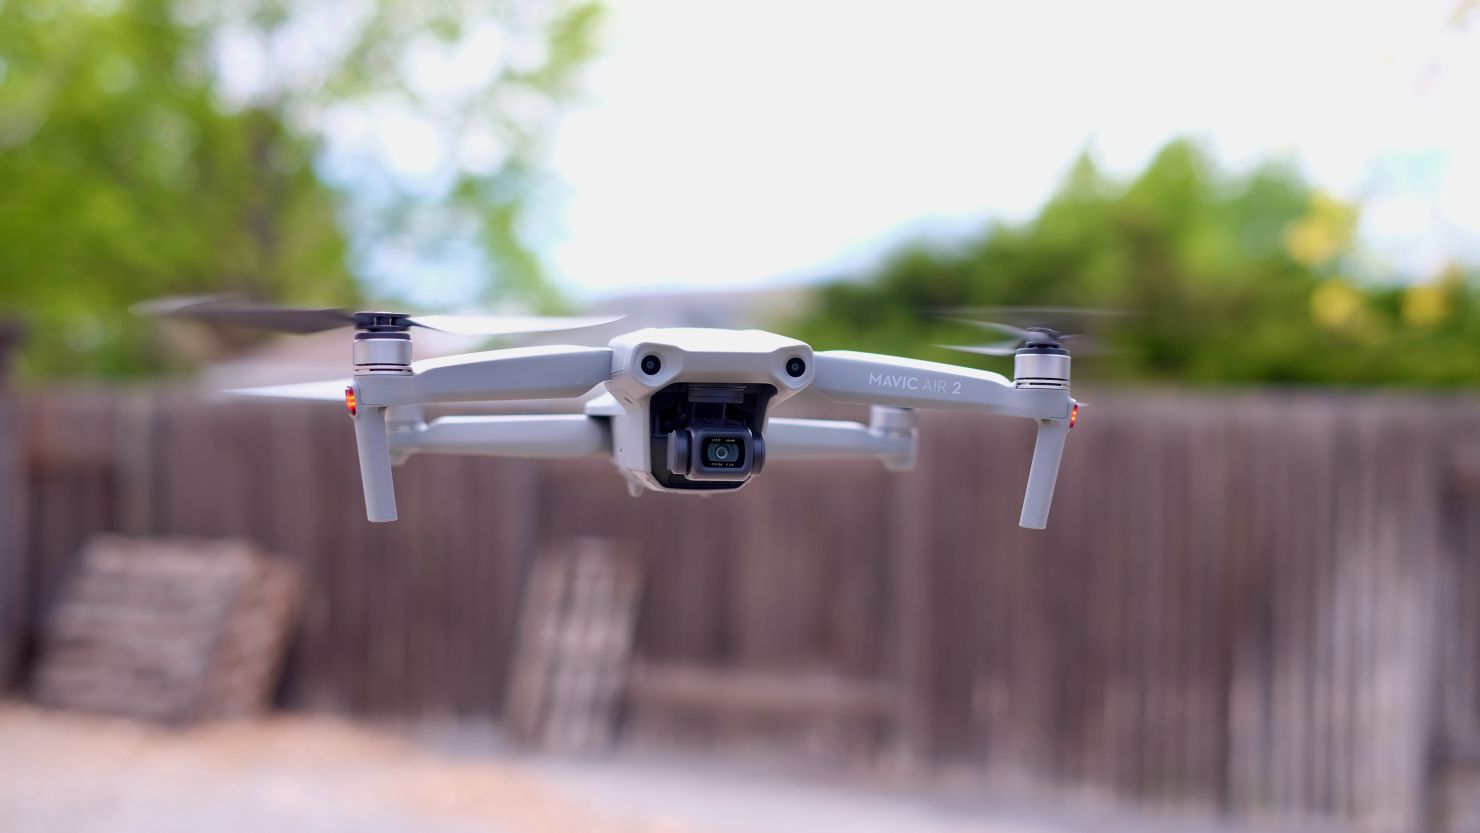 DJI confirms battery issues for its Mini 2 drone: Digital Photography Review